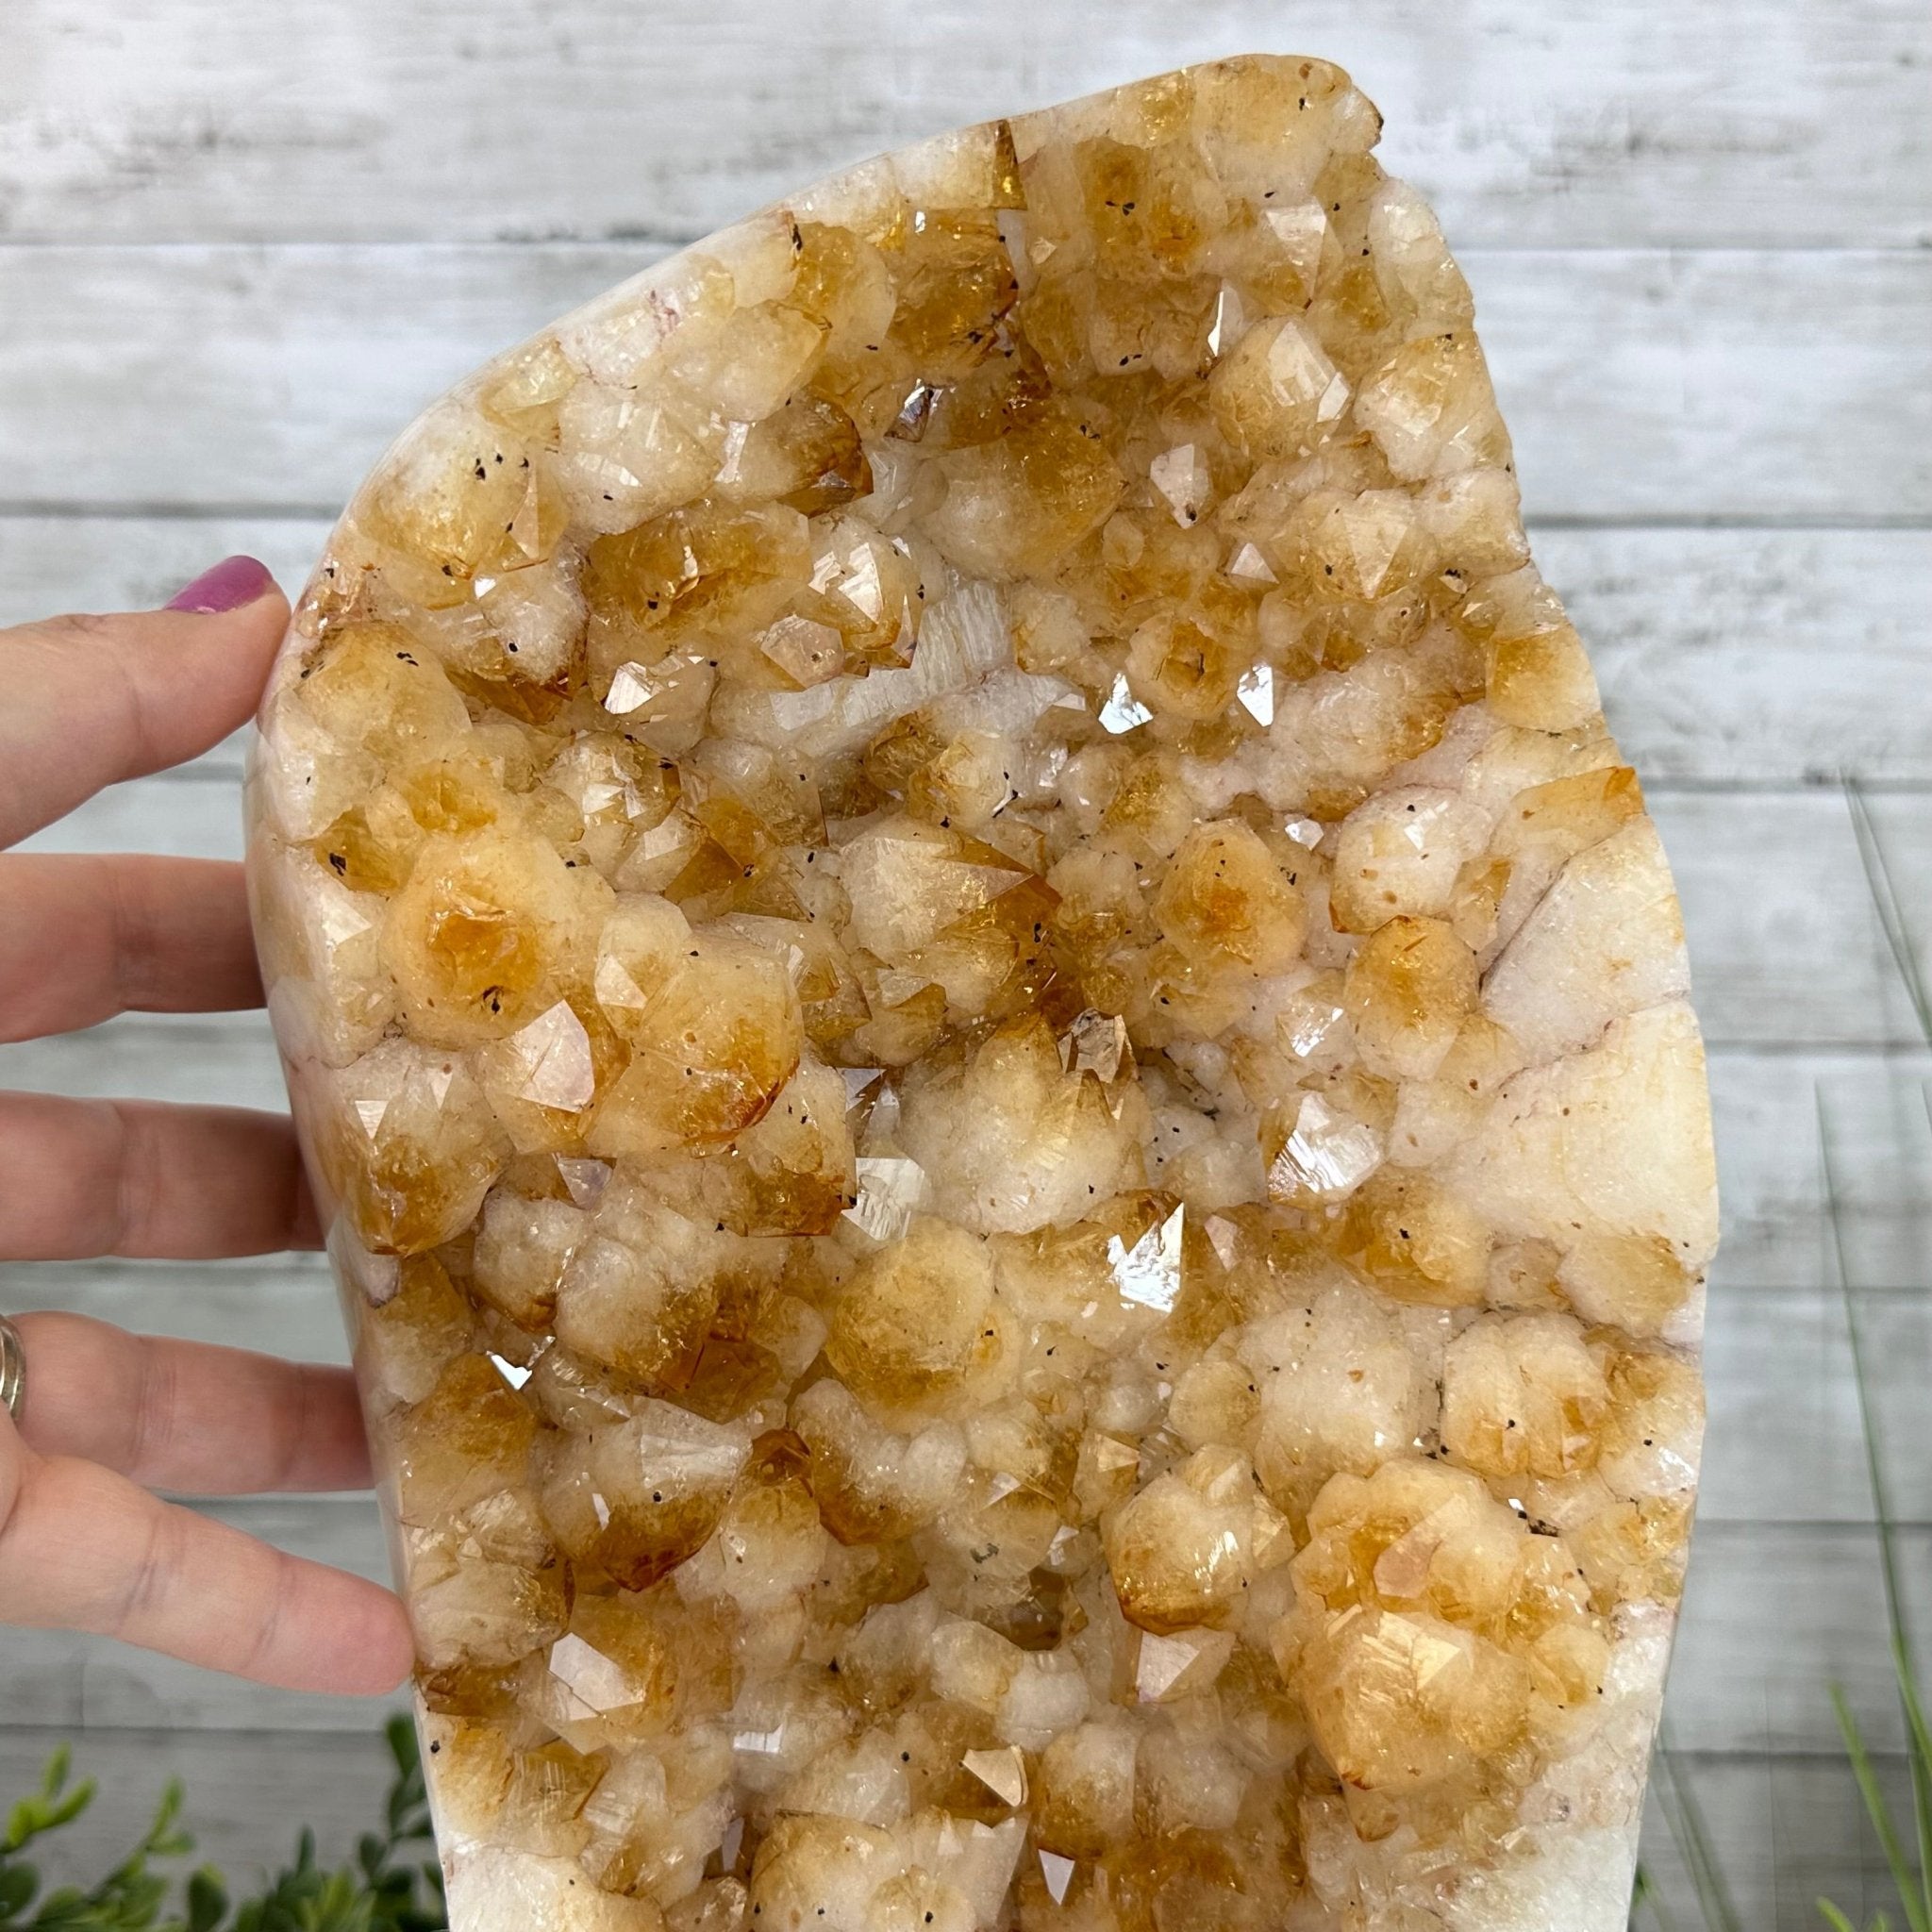 Extra Quality Citrine Cluster, Cement Base, 5.5" Tall #5615-0040 - Brazil GemsBrazil GemsExtra Quality Citrine Cluster, Cement Base, 5.5" Tall #5615-0040Clusters on Cement Bases5615-0040